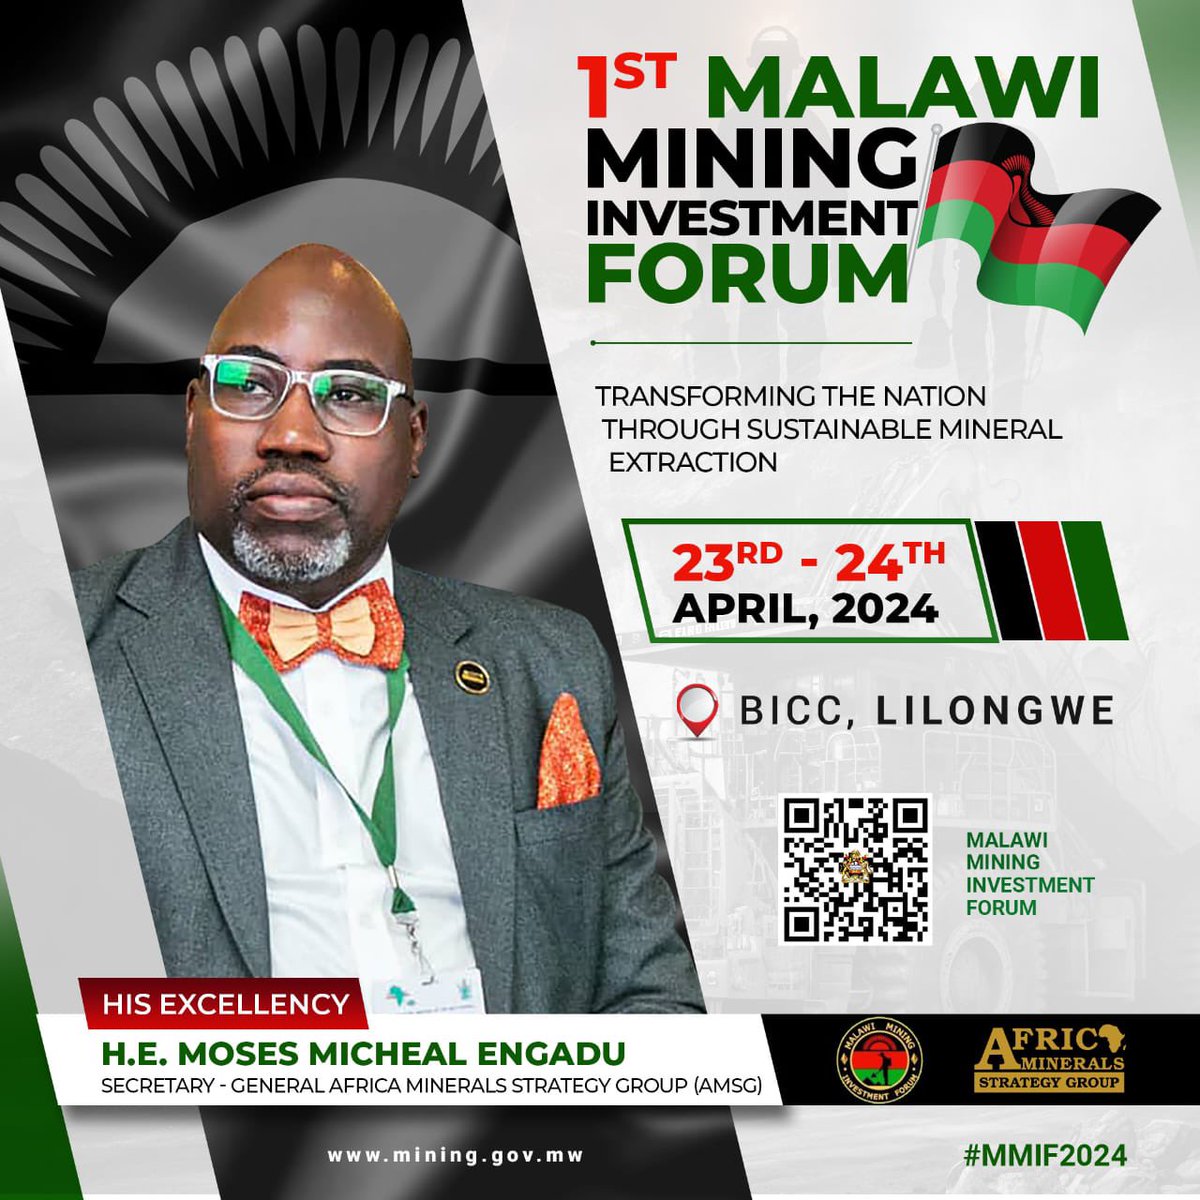 The Secretary-General @africaminerals_  H.E Moses Micheal Engadu (@engadu) will deliver a Keynote Adress at the inaugural Malawi Mining Investment Forum under the theme: 'Transforming the Nation through Sustainable Mineral Extraction'. 

#MMIF2024
#AfricaCriticalMinerals